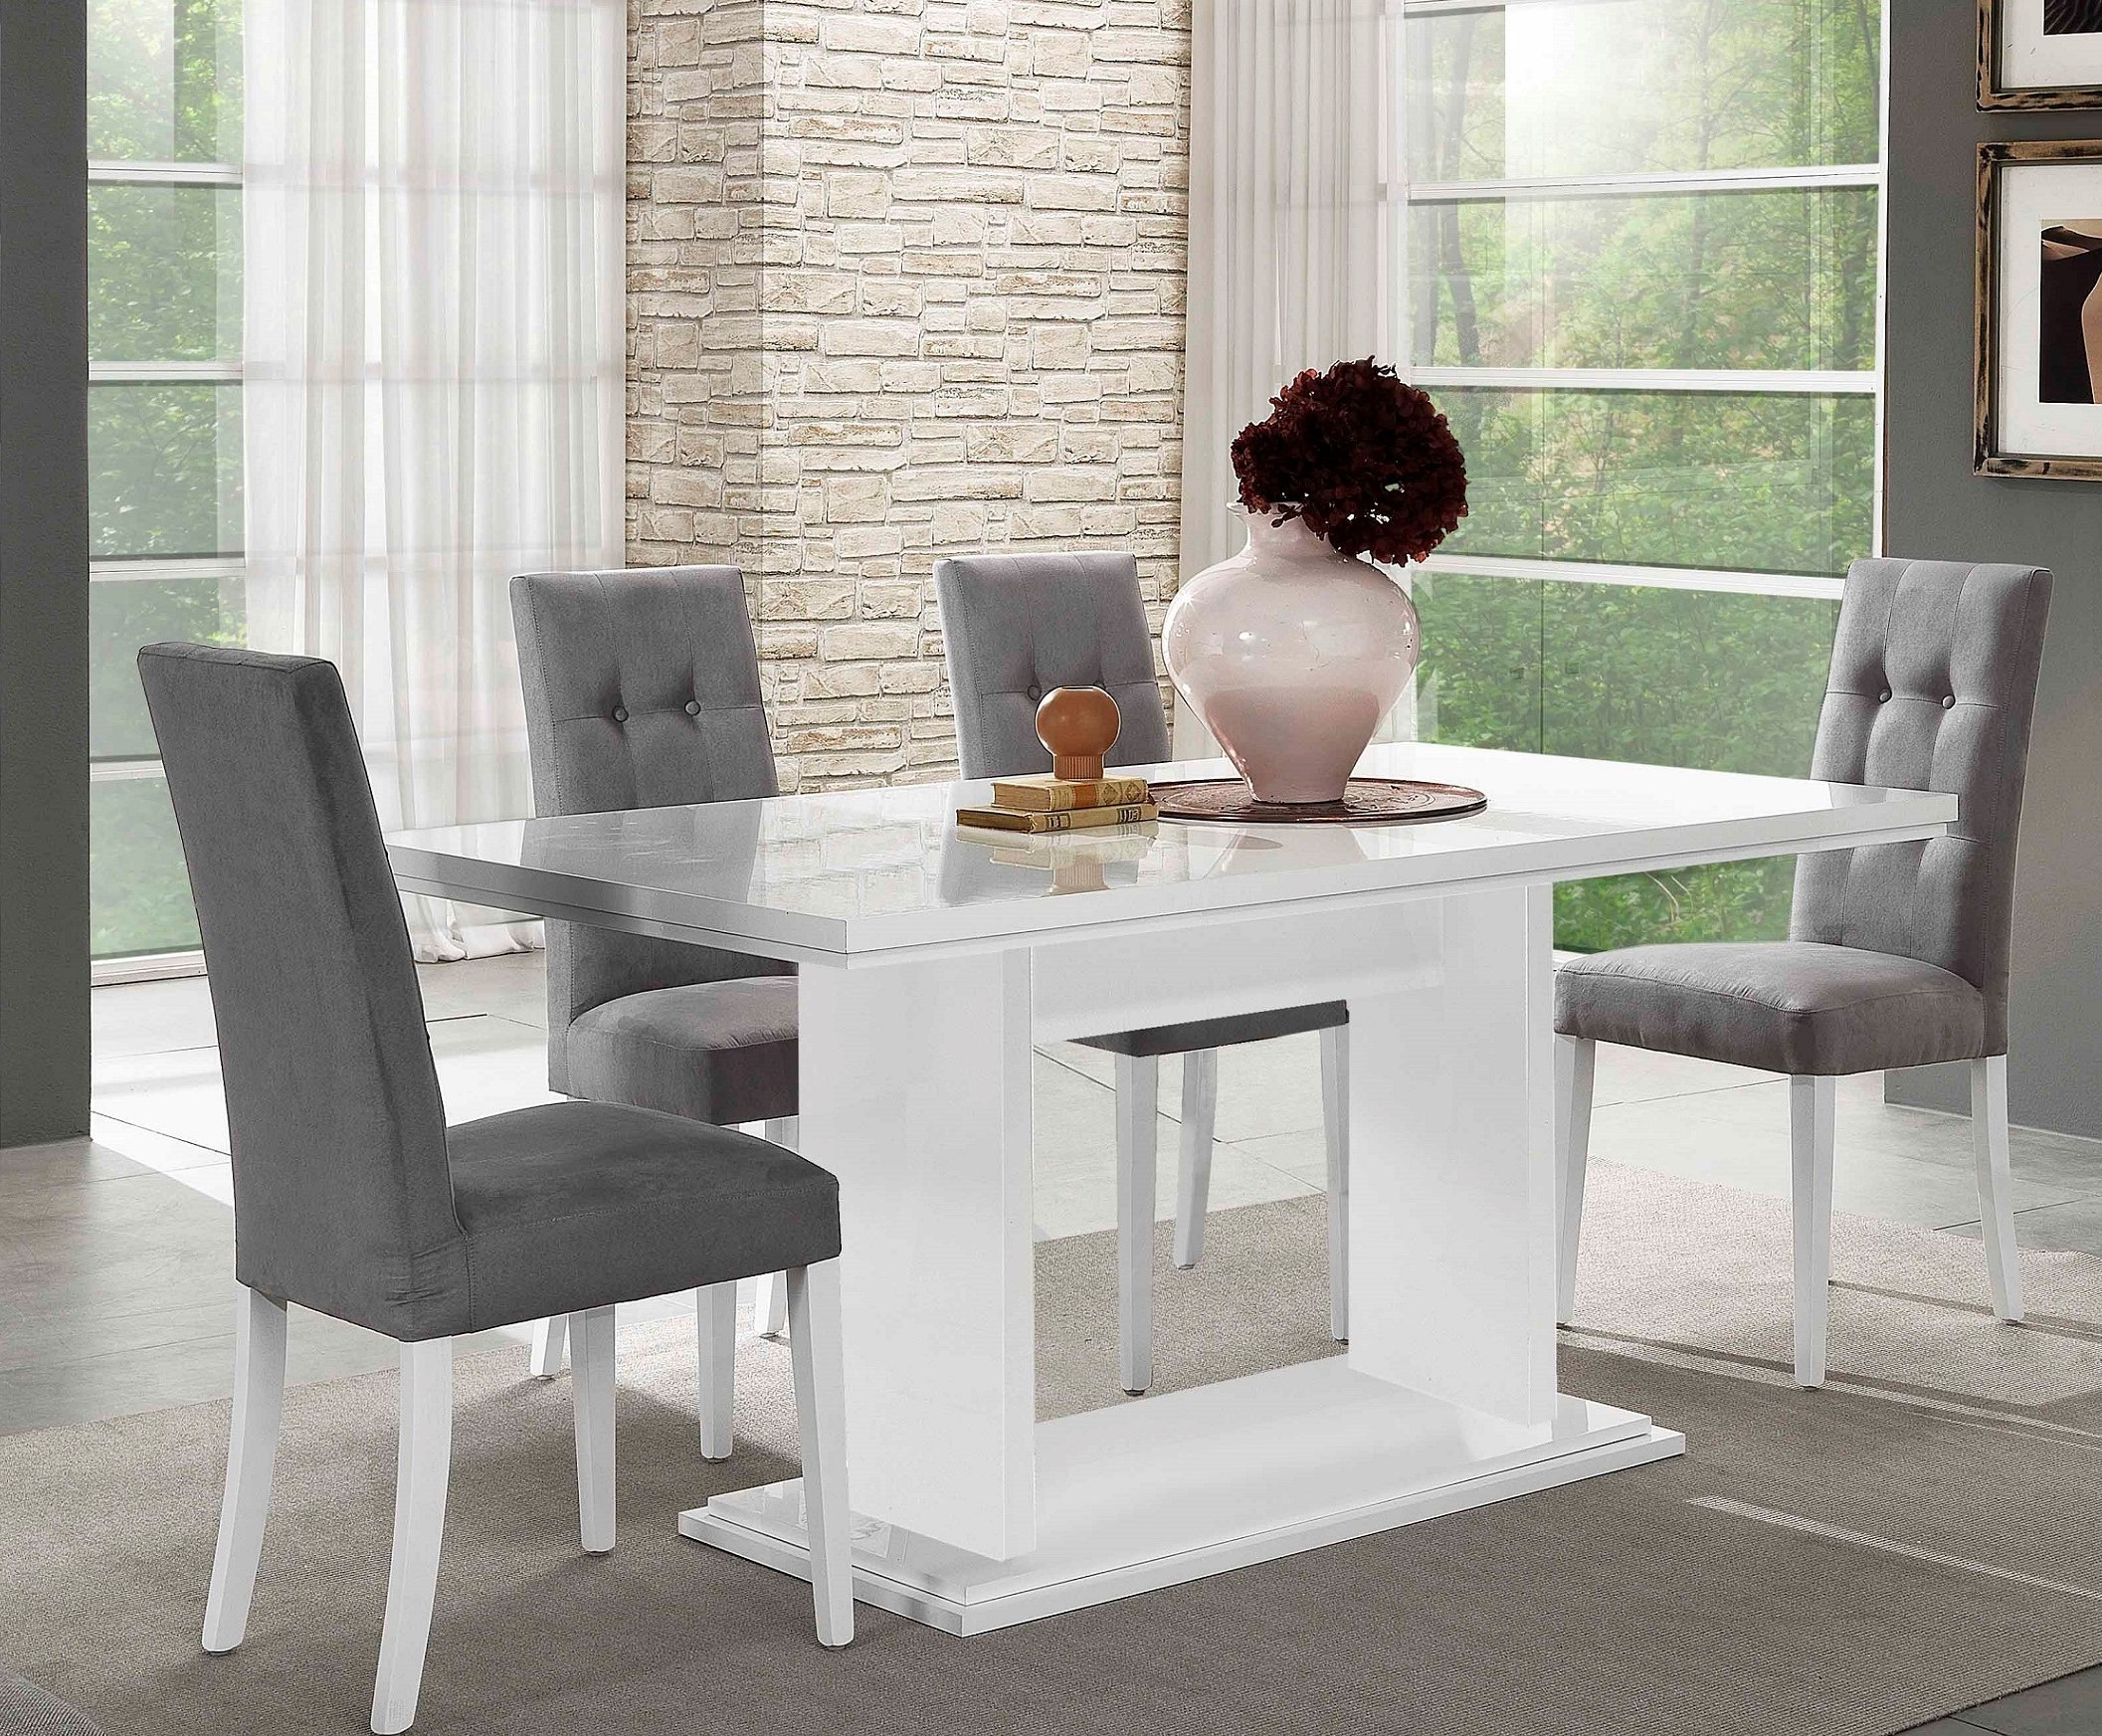 Nadine Italian White High Gloss 160cm Dining Table with regard to size 2113 X 1745